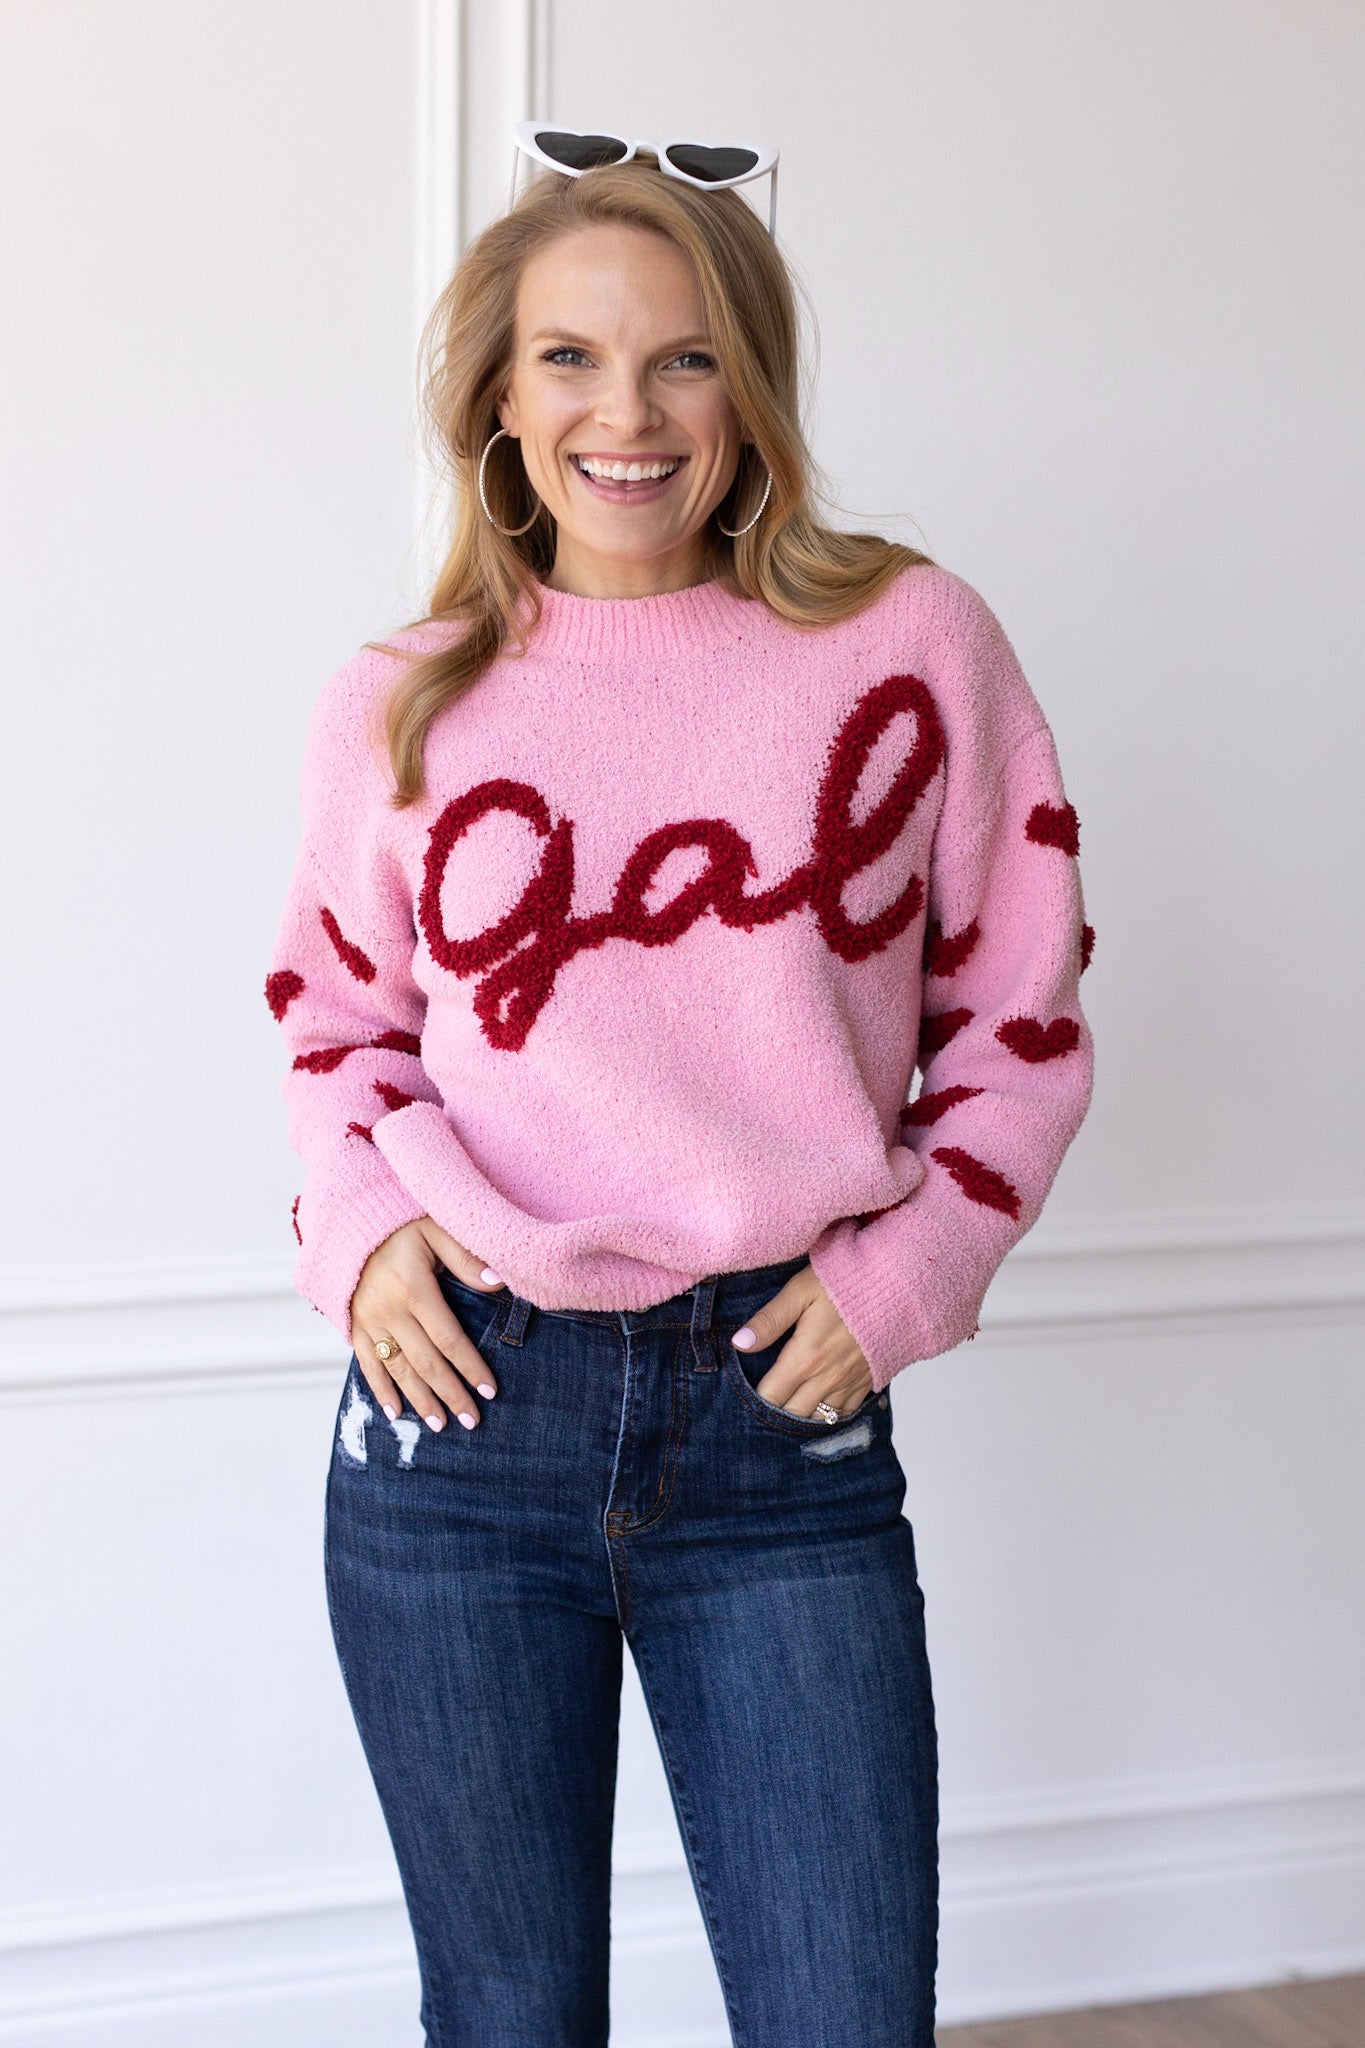 Gal on Pink Fuzzy Sweater